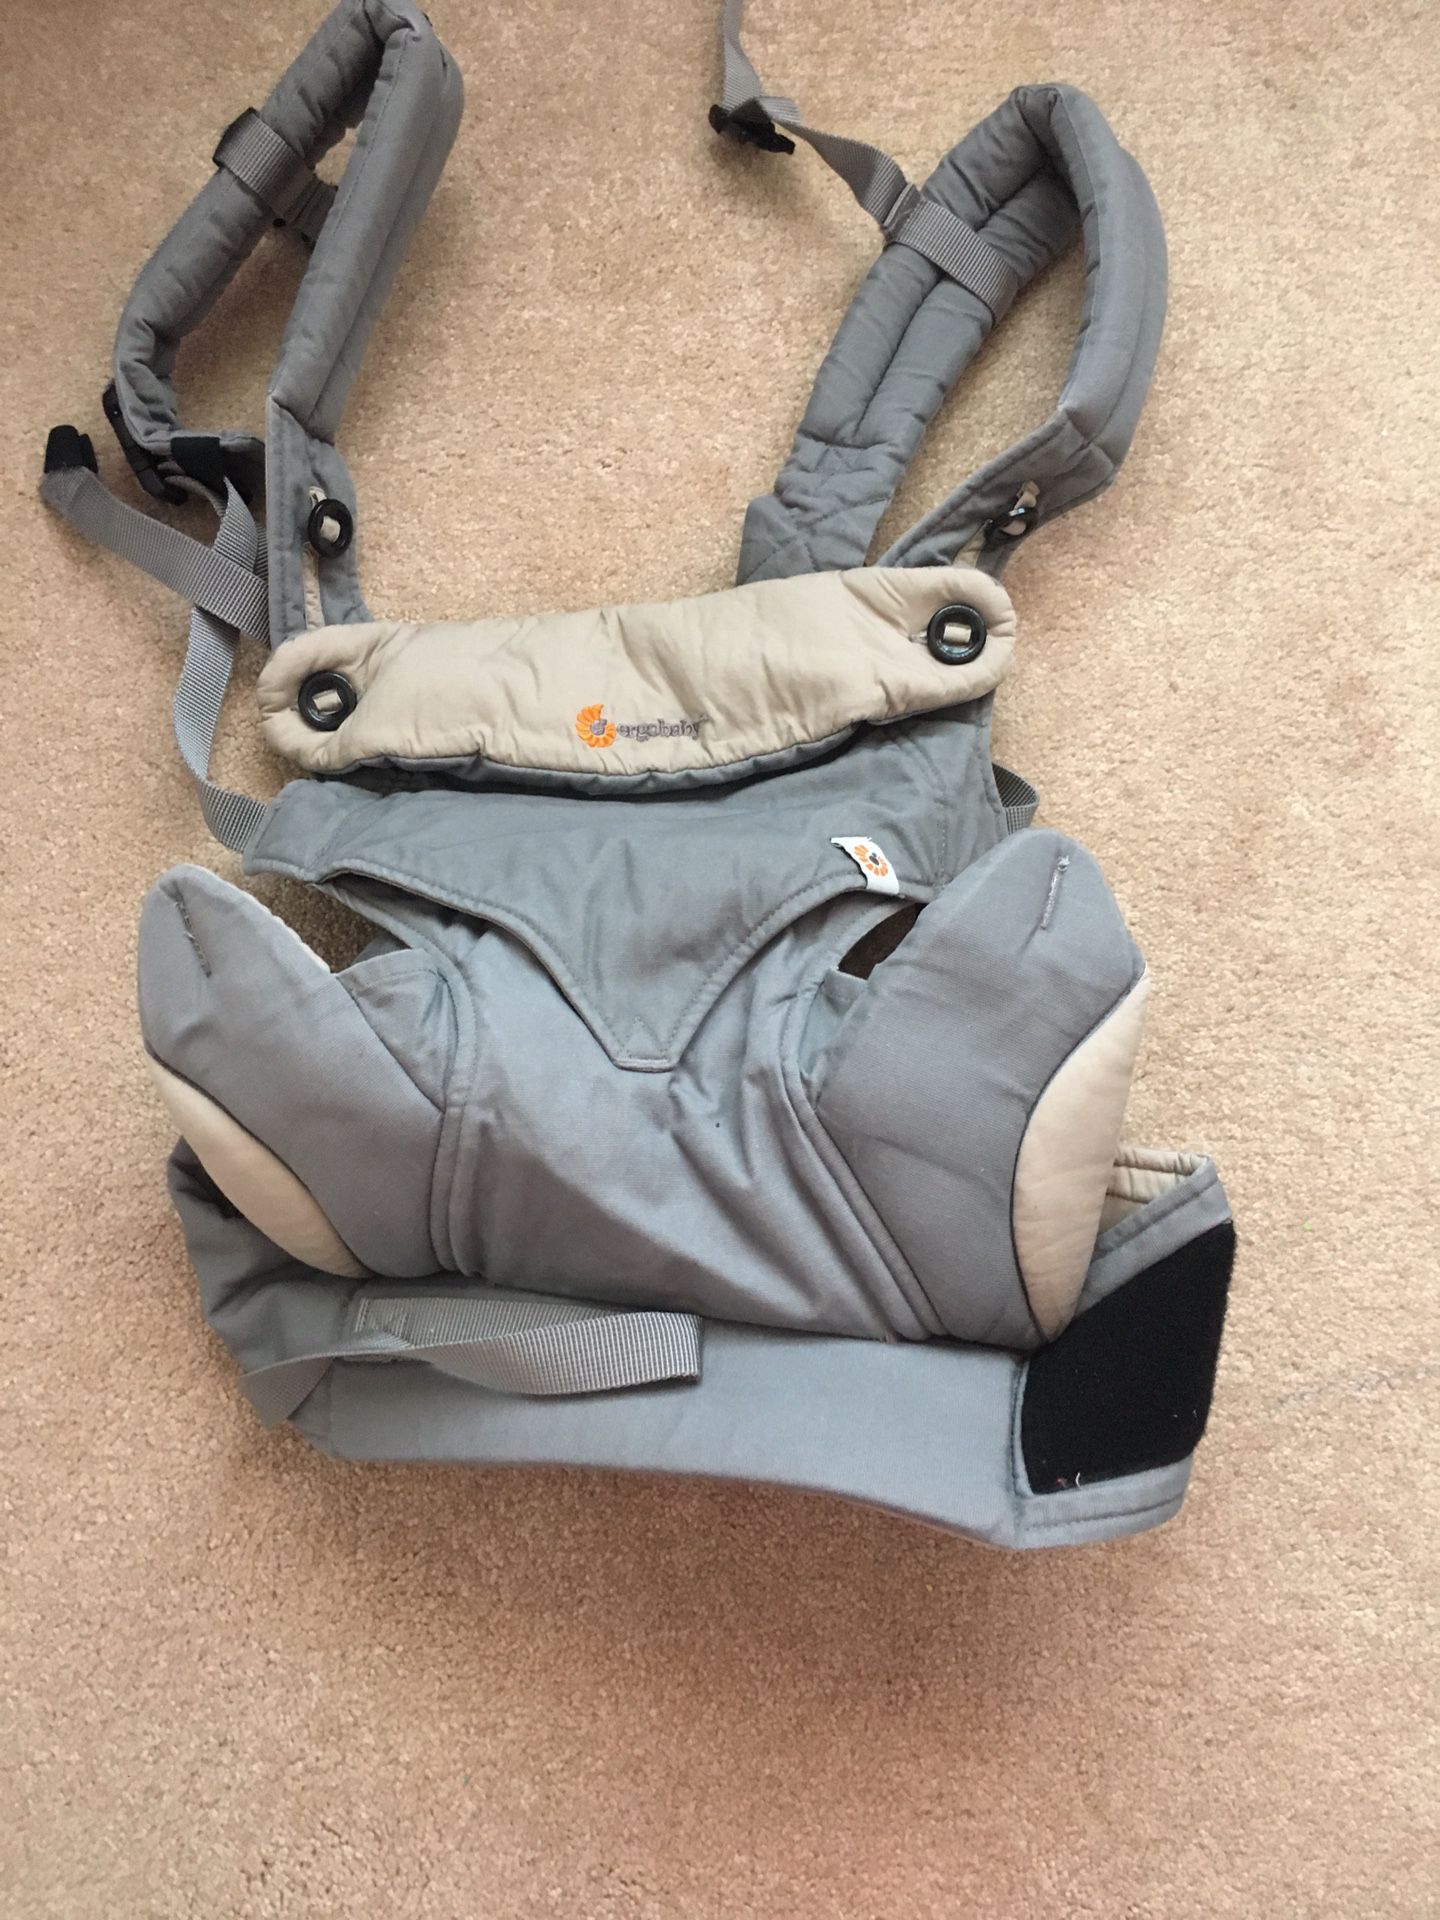 Ergobaby Carrier, 360 All Carry Positions Baby Carrier with Cool Air Mesh, Carbon Grey